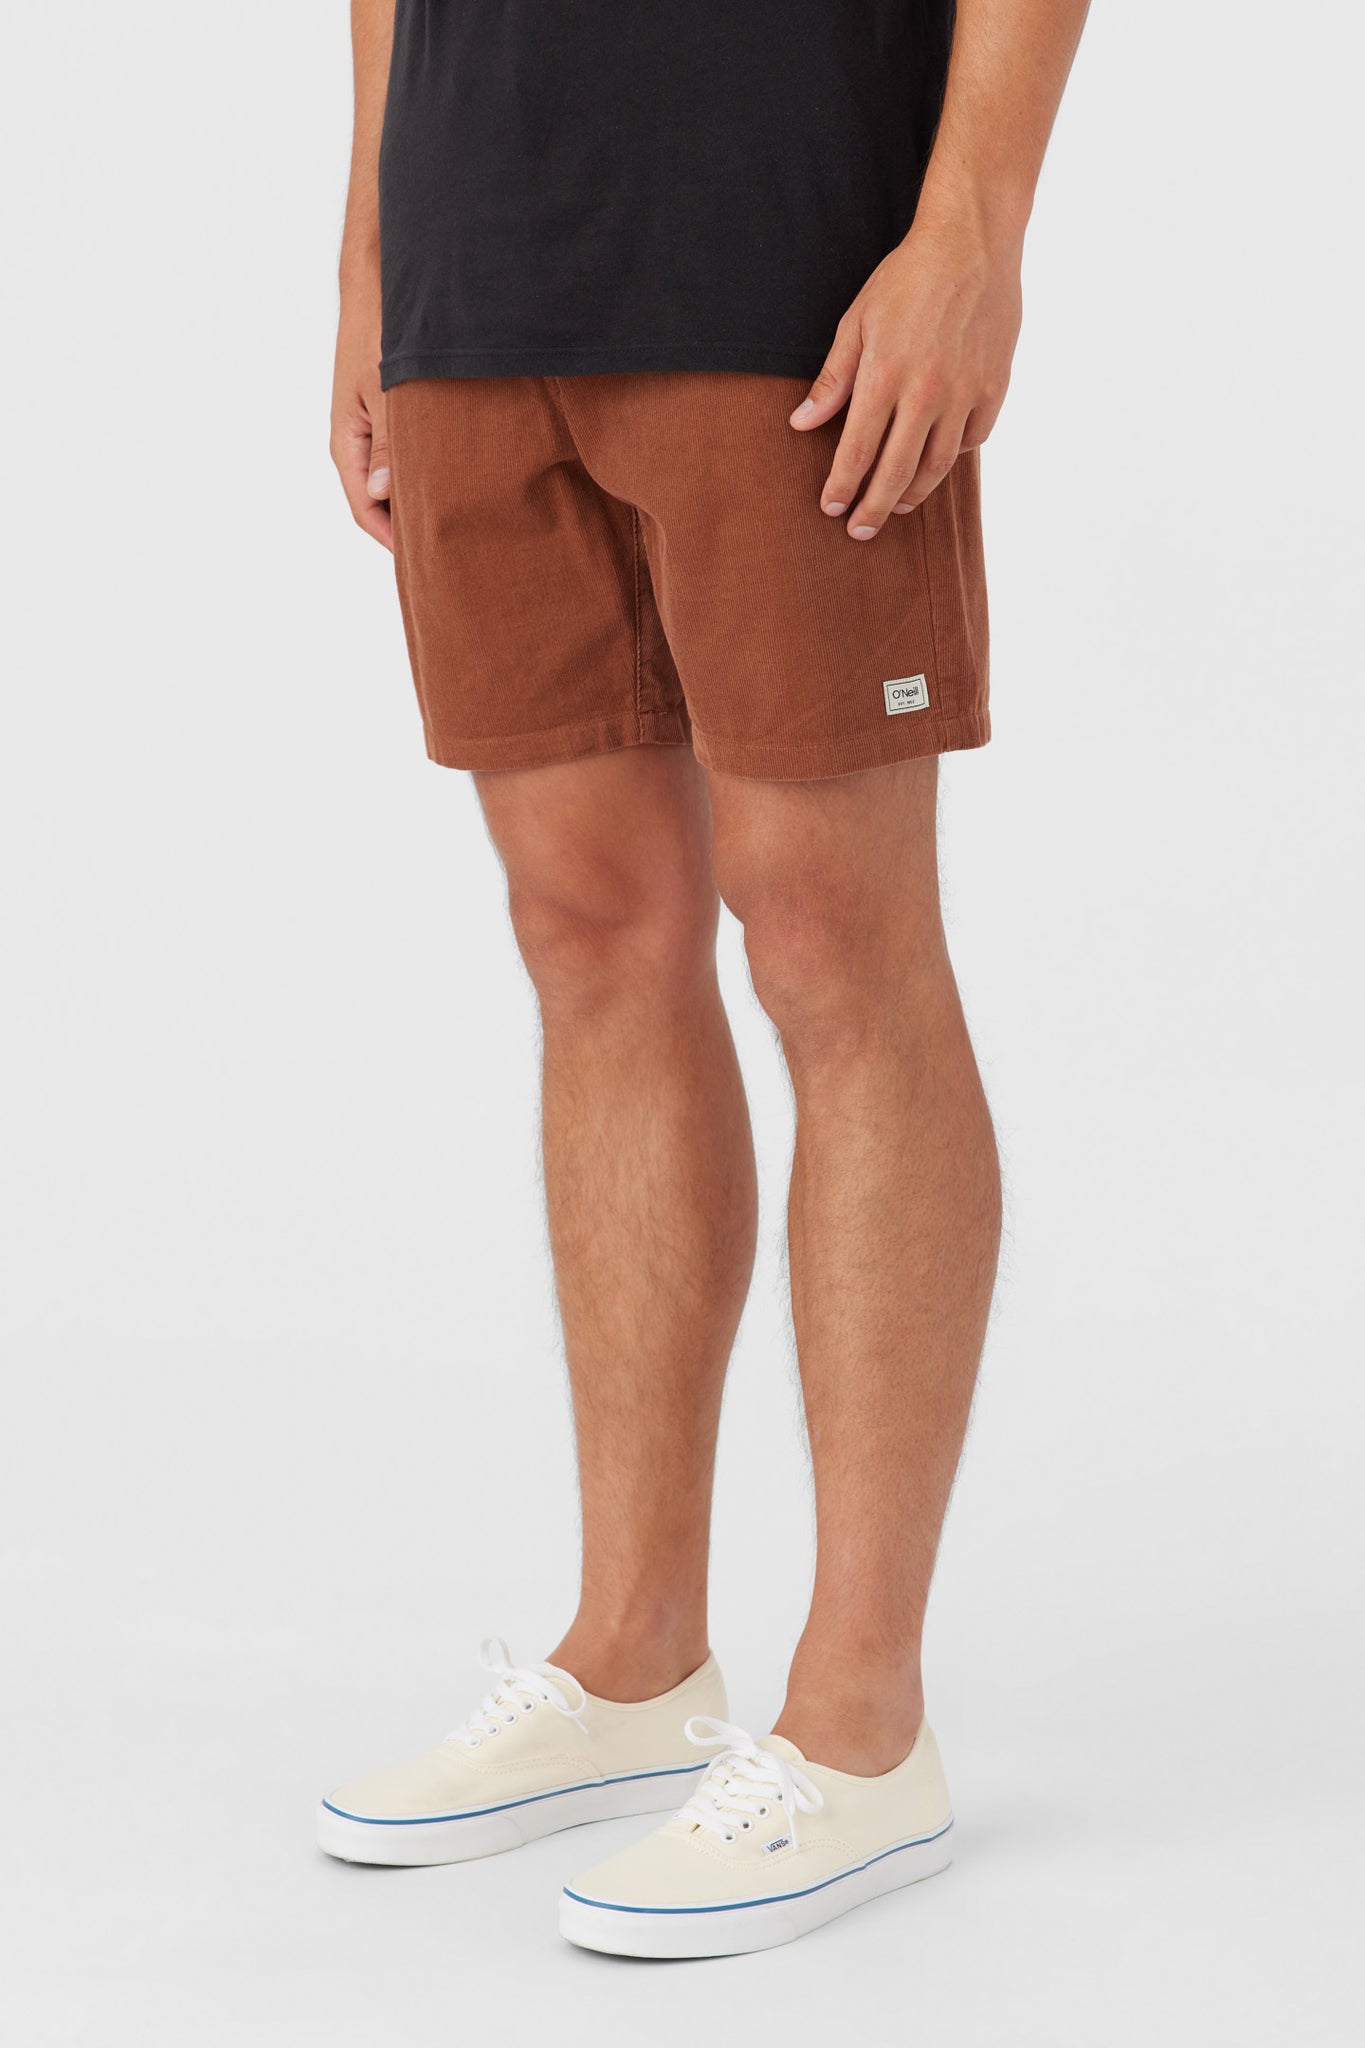 Larry Cord - Corduroy Shorts for Boys 8-16